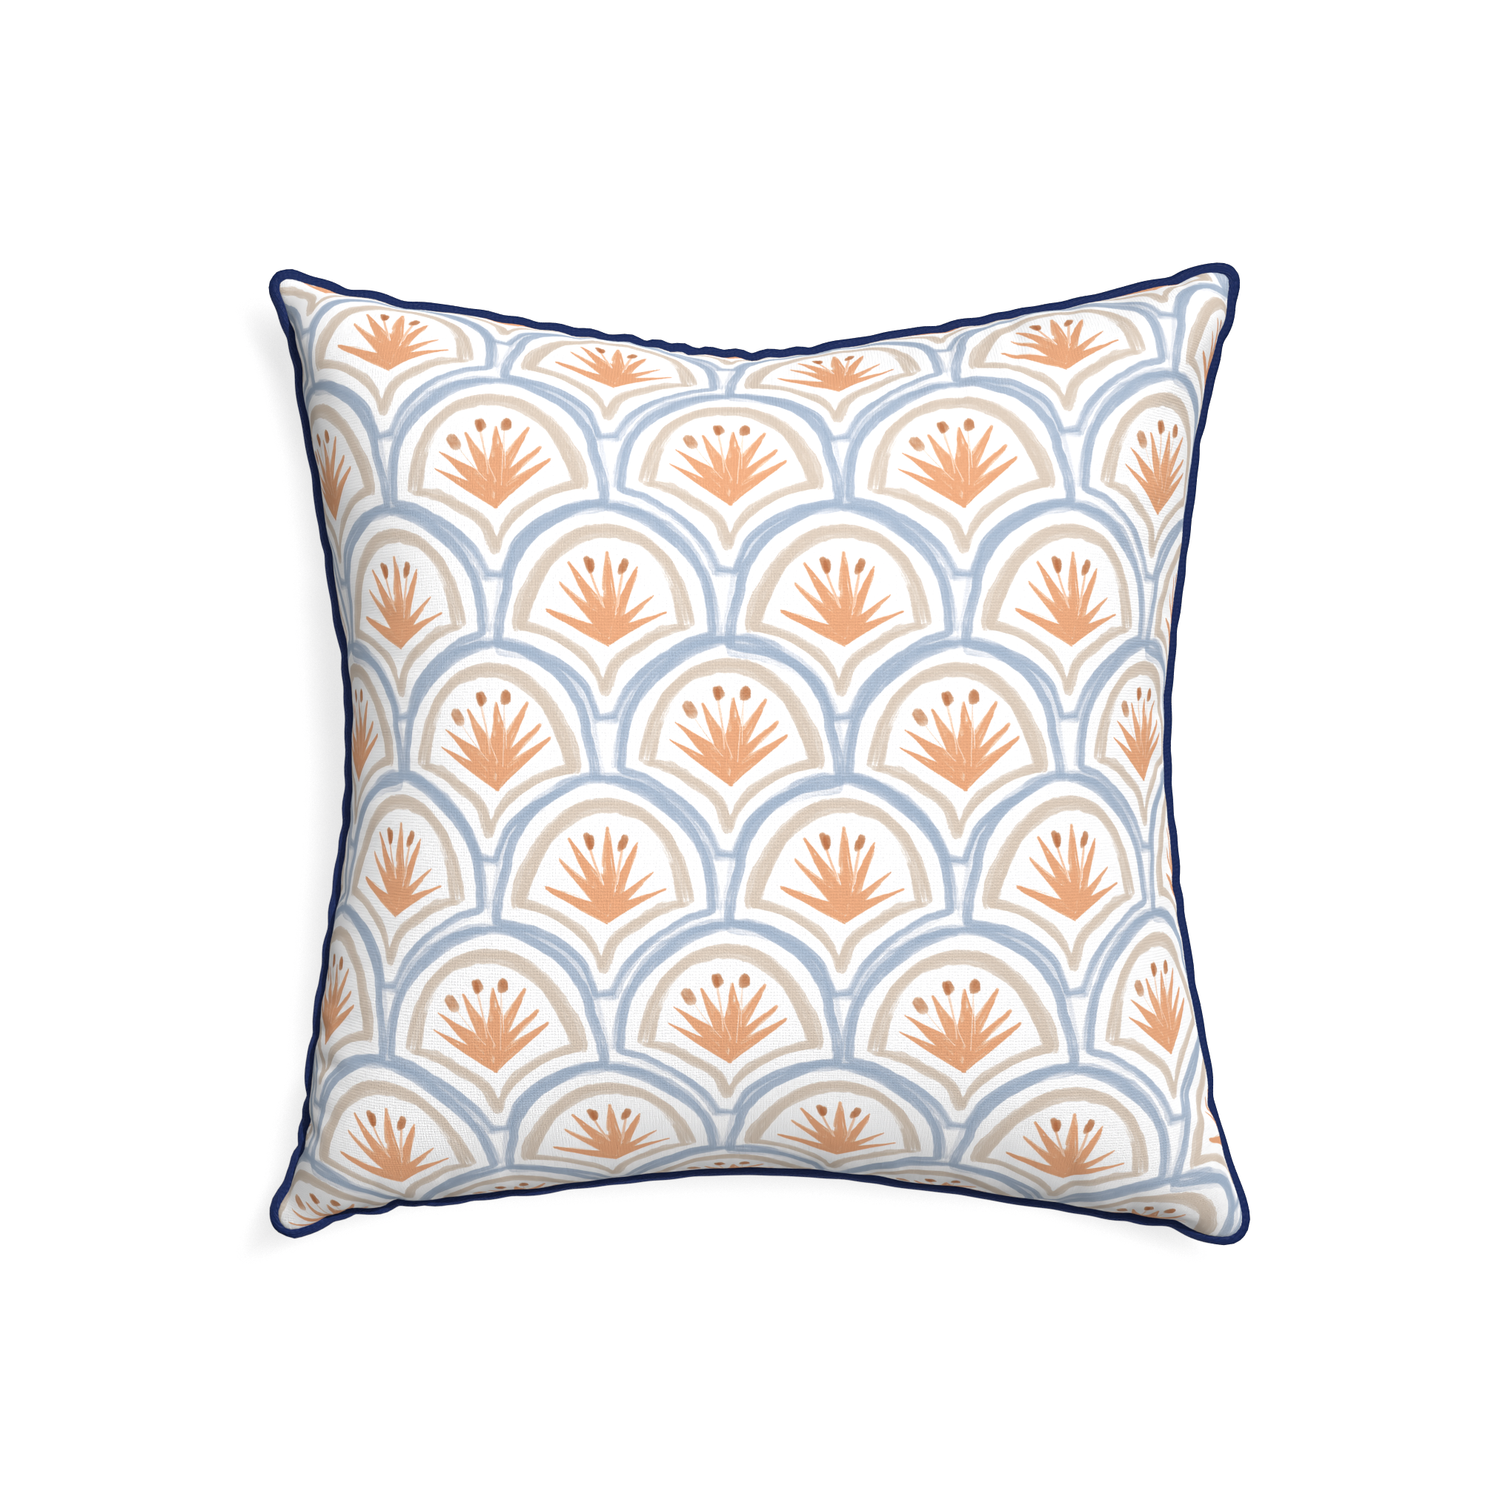 22-square thatcher apricot custom art deco palm patternpillow with midnight piping on white background